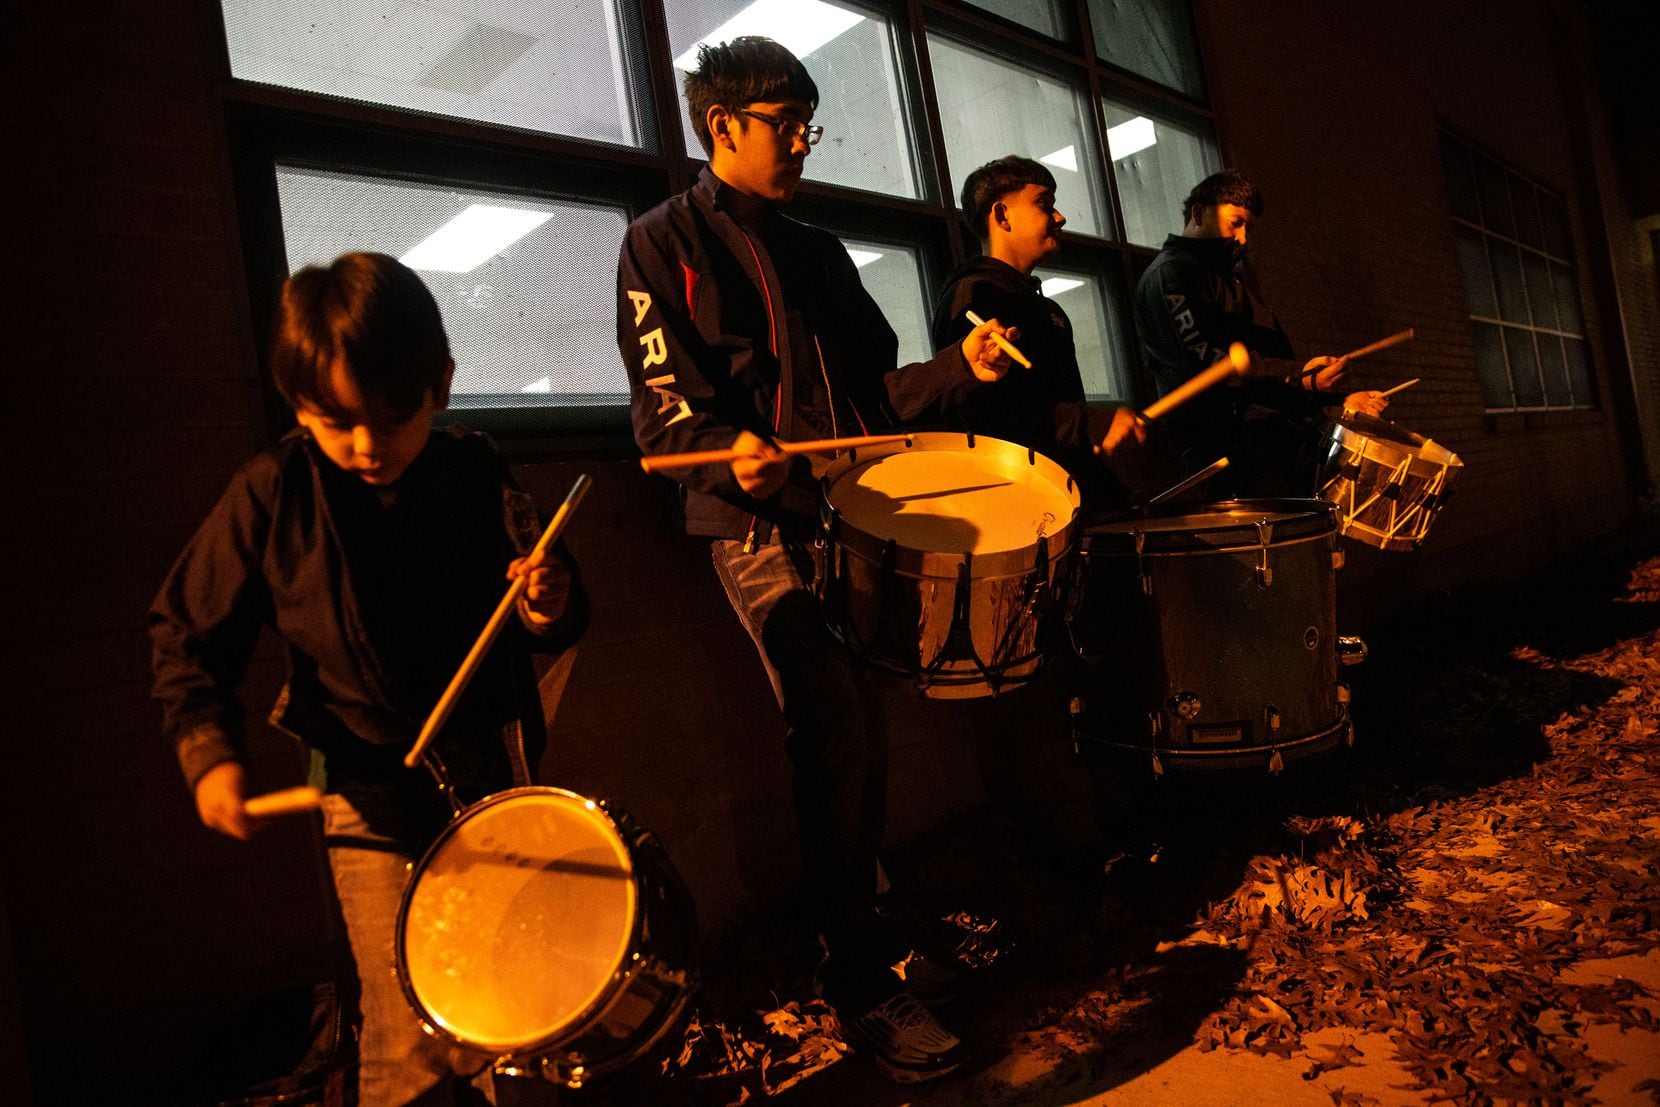 Brothers (from left) Christopher de la Sancha, 7, and Alexander Flores, 15, play the drums with brothers Arnulfo Diaz Jr., 15, and Abraham Diaz, 21, to keep rhythm for Danza Chichimeca San Miguel de Arcángel members.